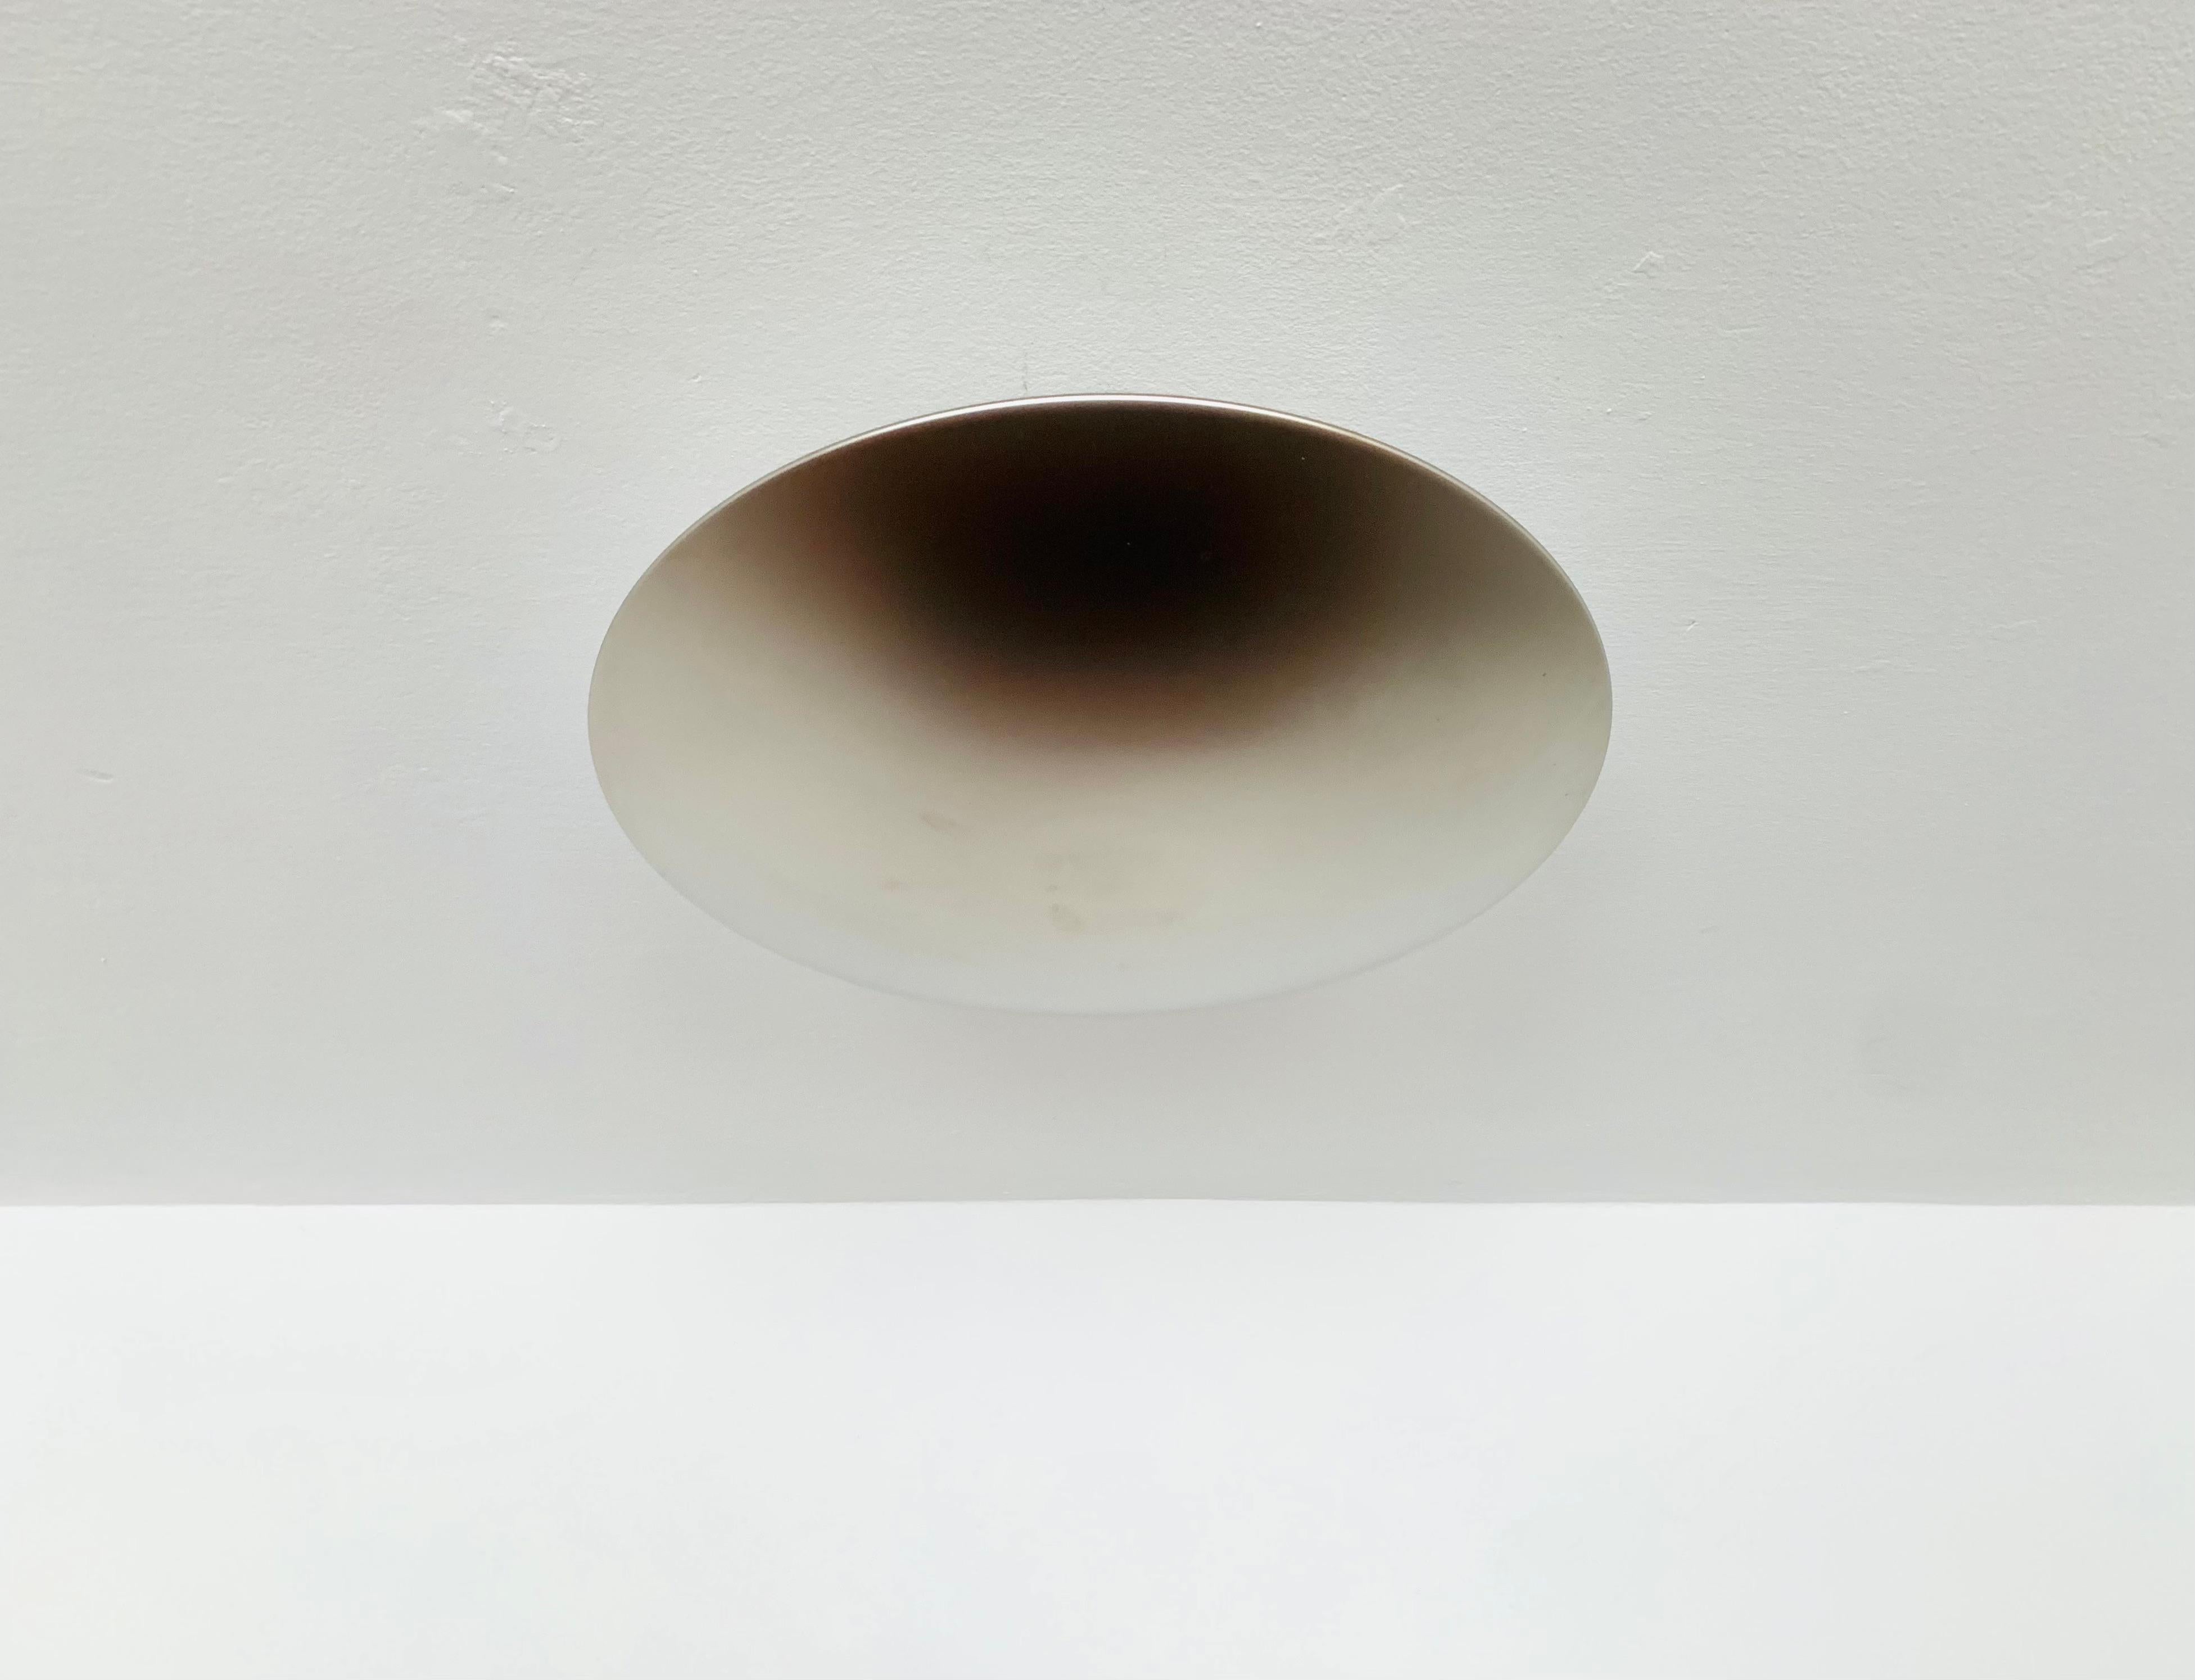 Nickel plated Sela/ Gela 55 Wall or Ceiling Lamp by Florian Schulz In Good Condition For Sale In München, DE